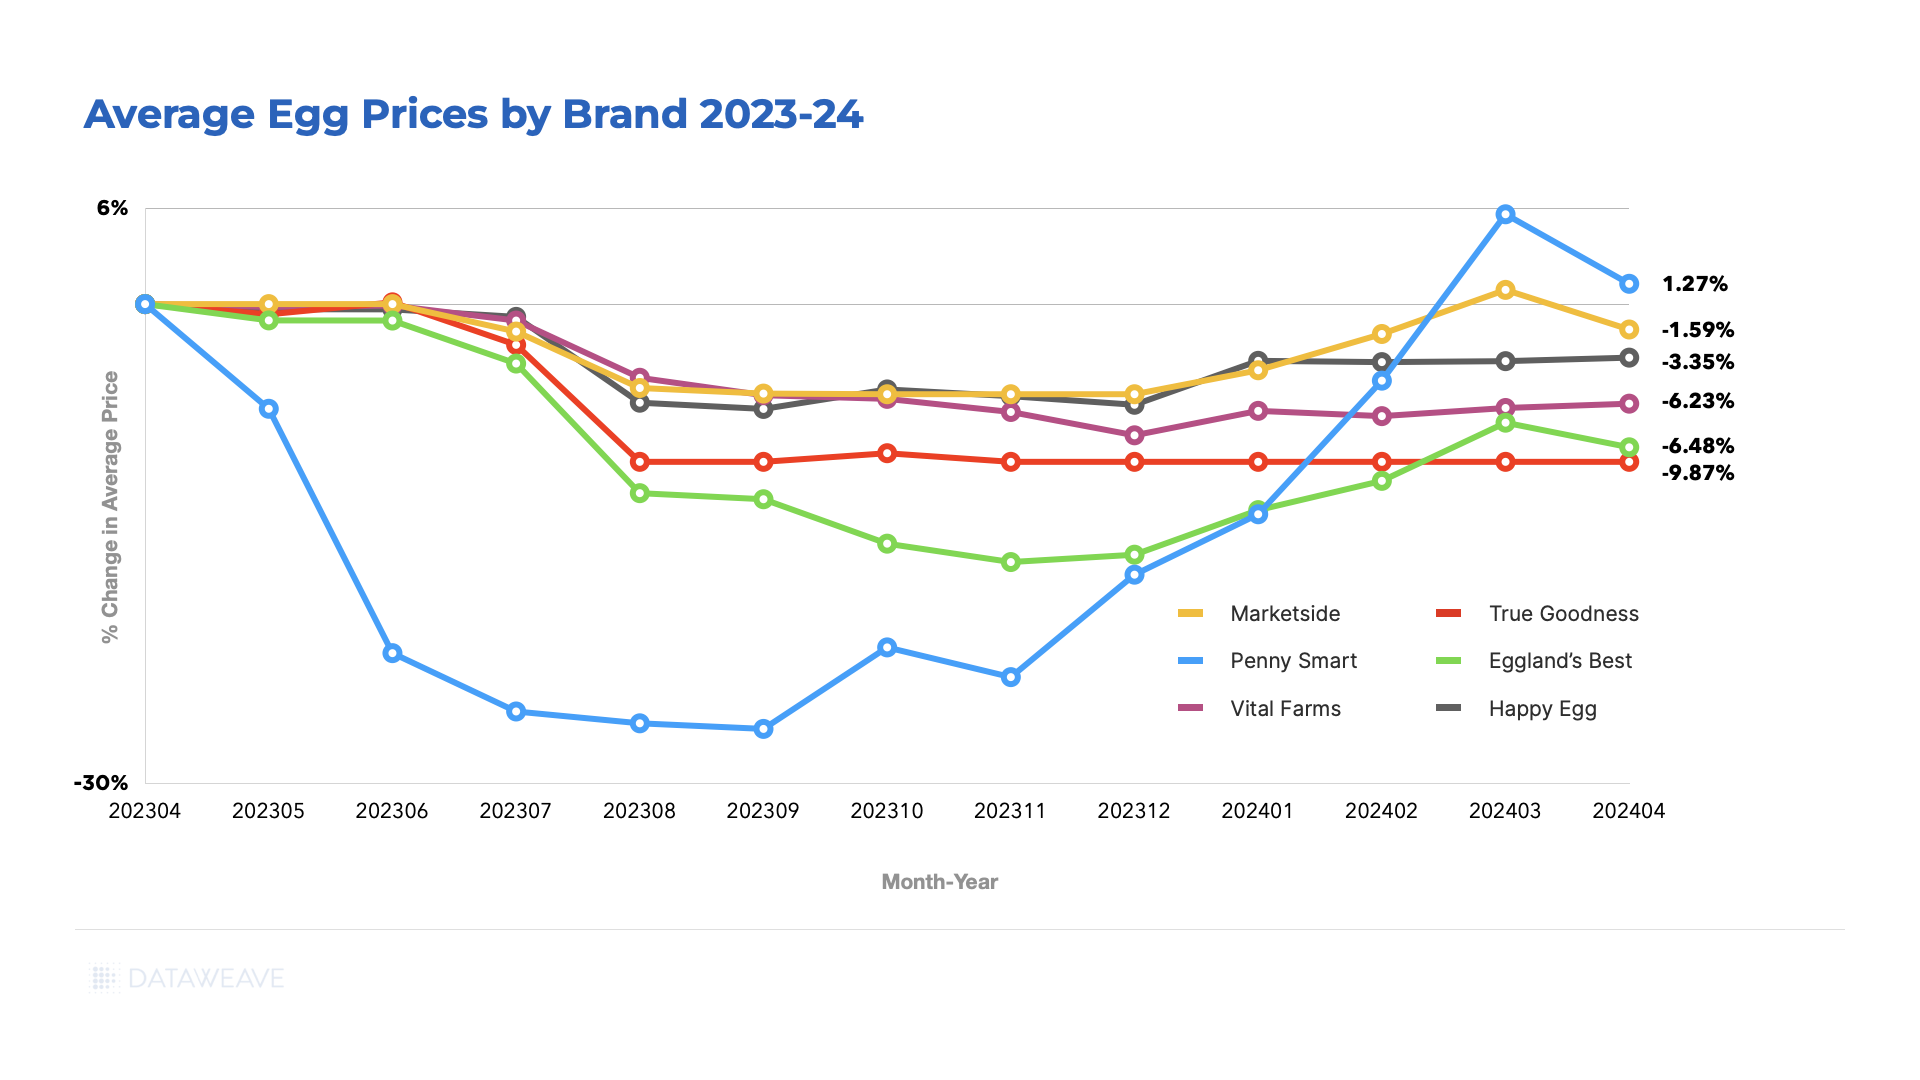 Egg Price Chart Featuring Leading Egg Brand Prices 2023-2024